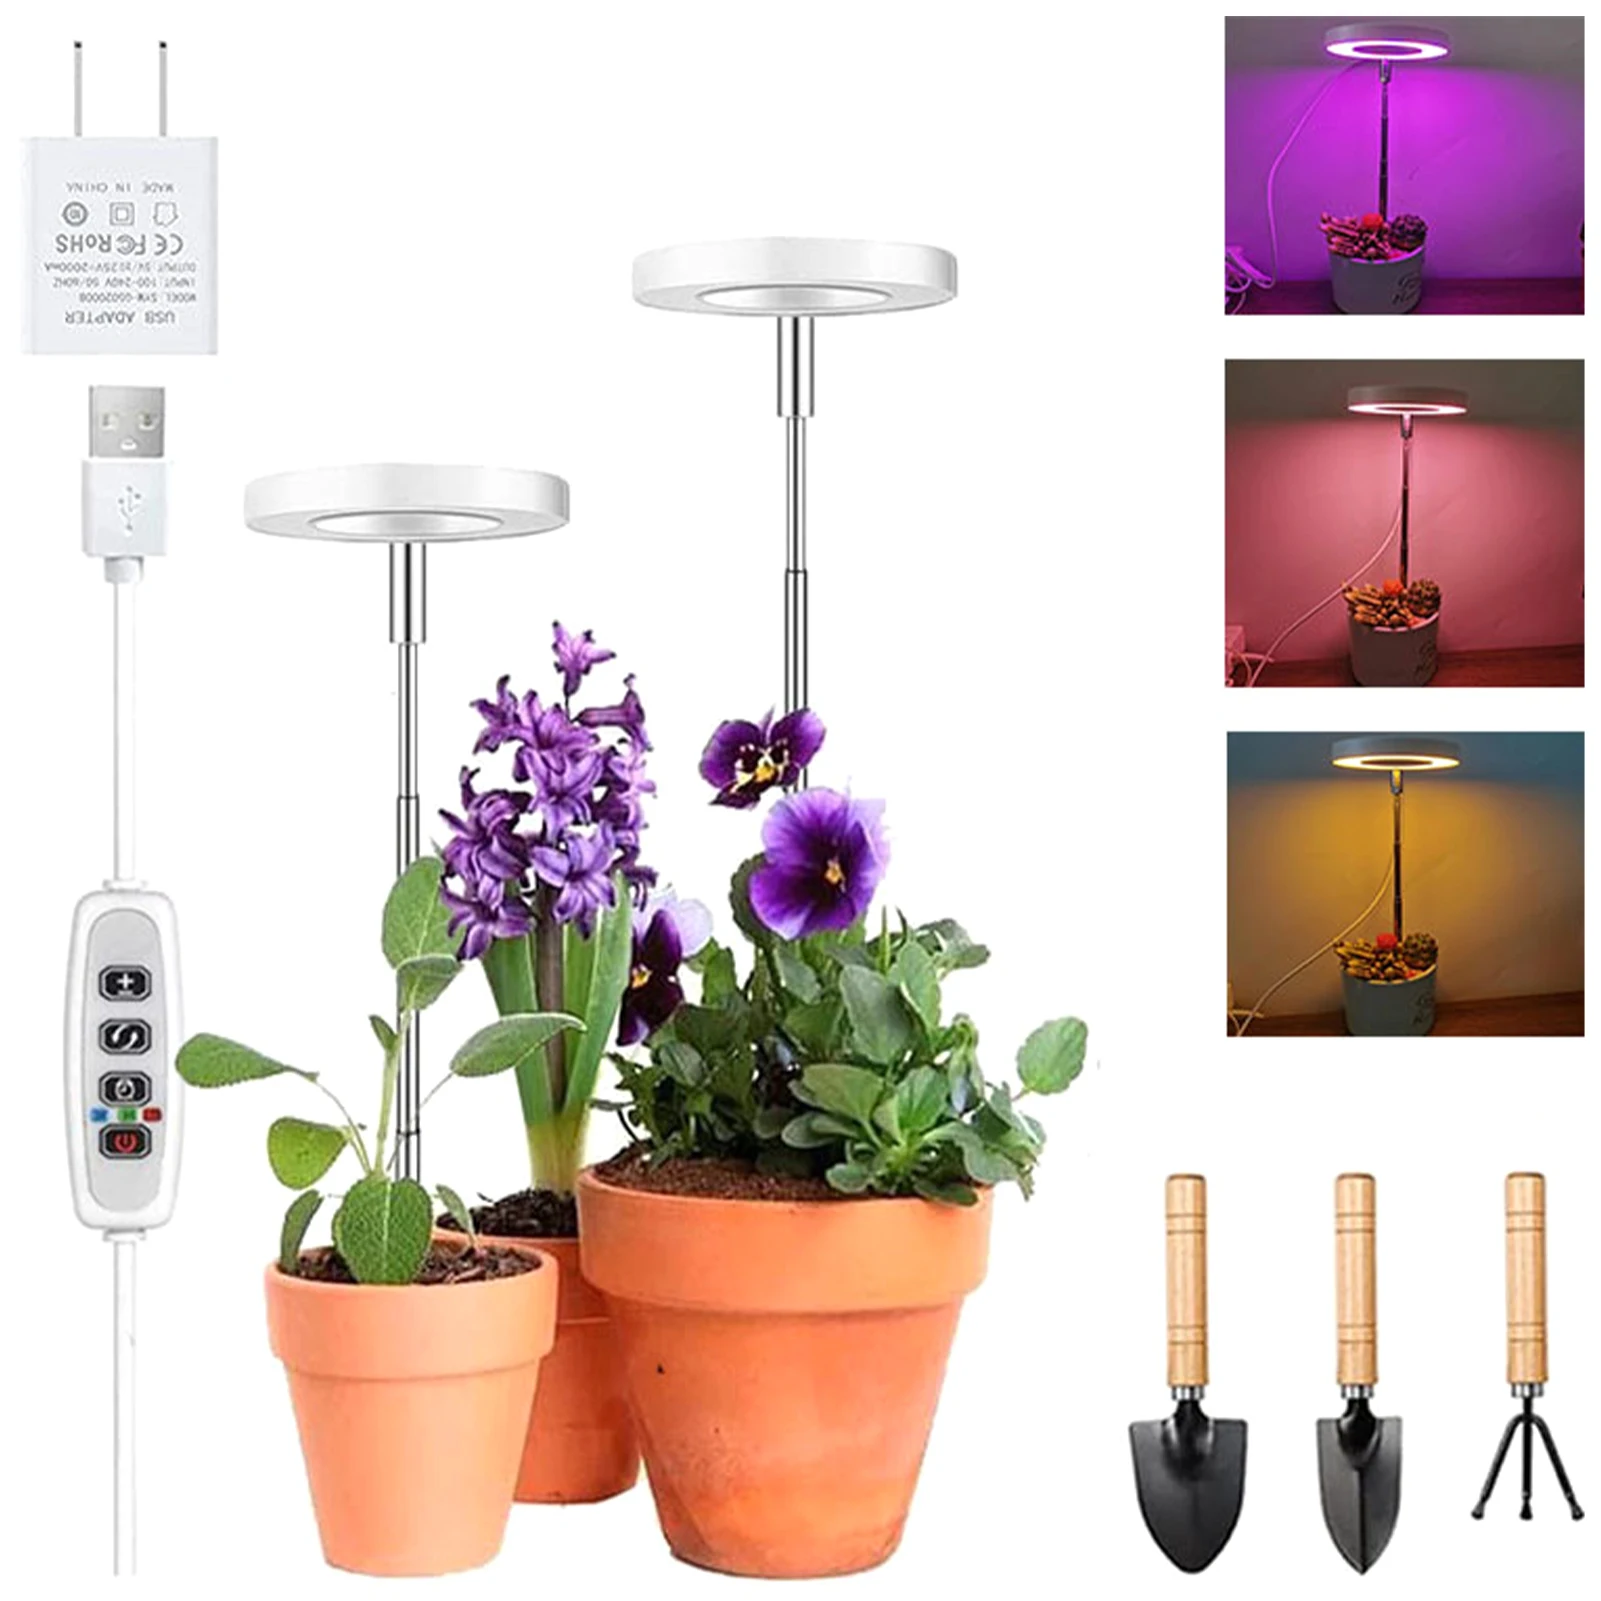 

Height Adjustable 3 Lights Mode 3 6 12 Auto Timer Grow Light 9 Dimming Level For Indoor Plants Waterproof With Shovel Succulents